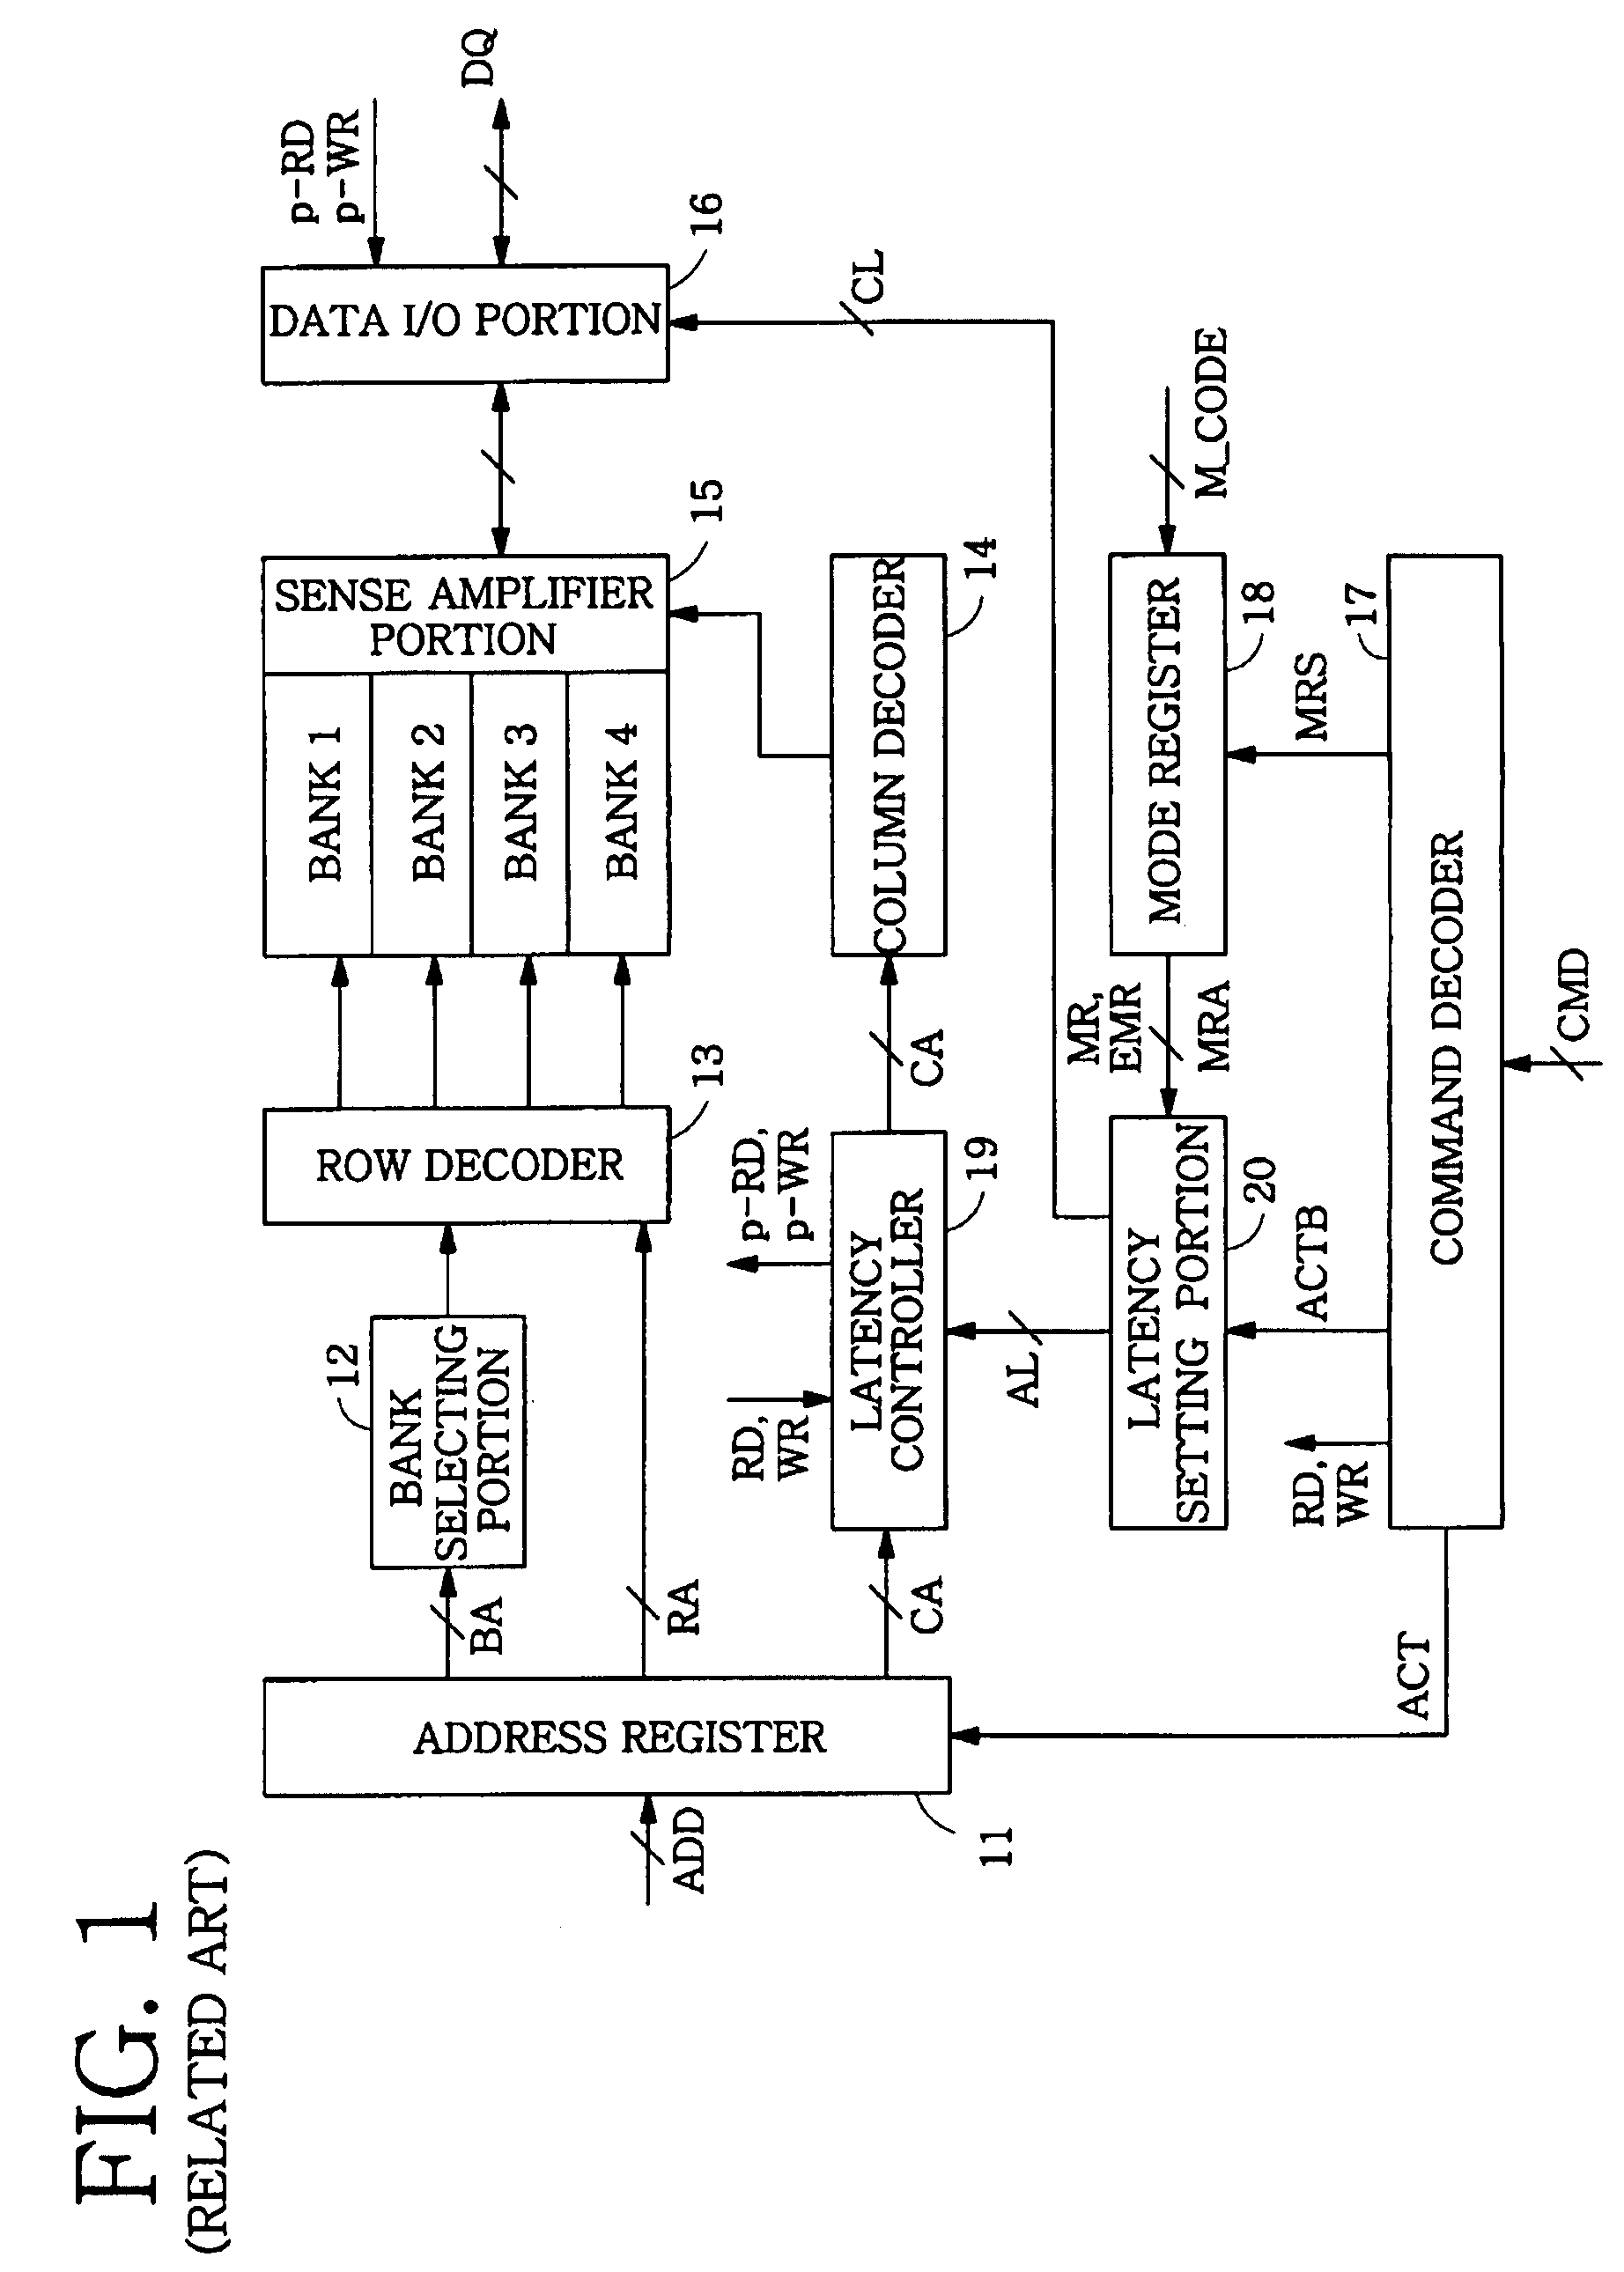 Semiconductor memory devices having variable additive latency